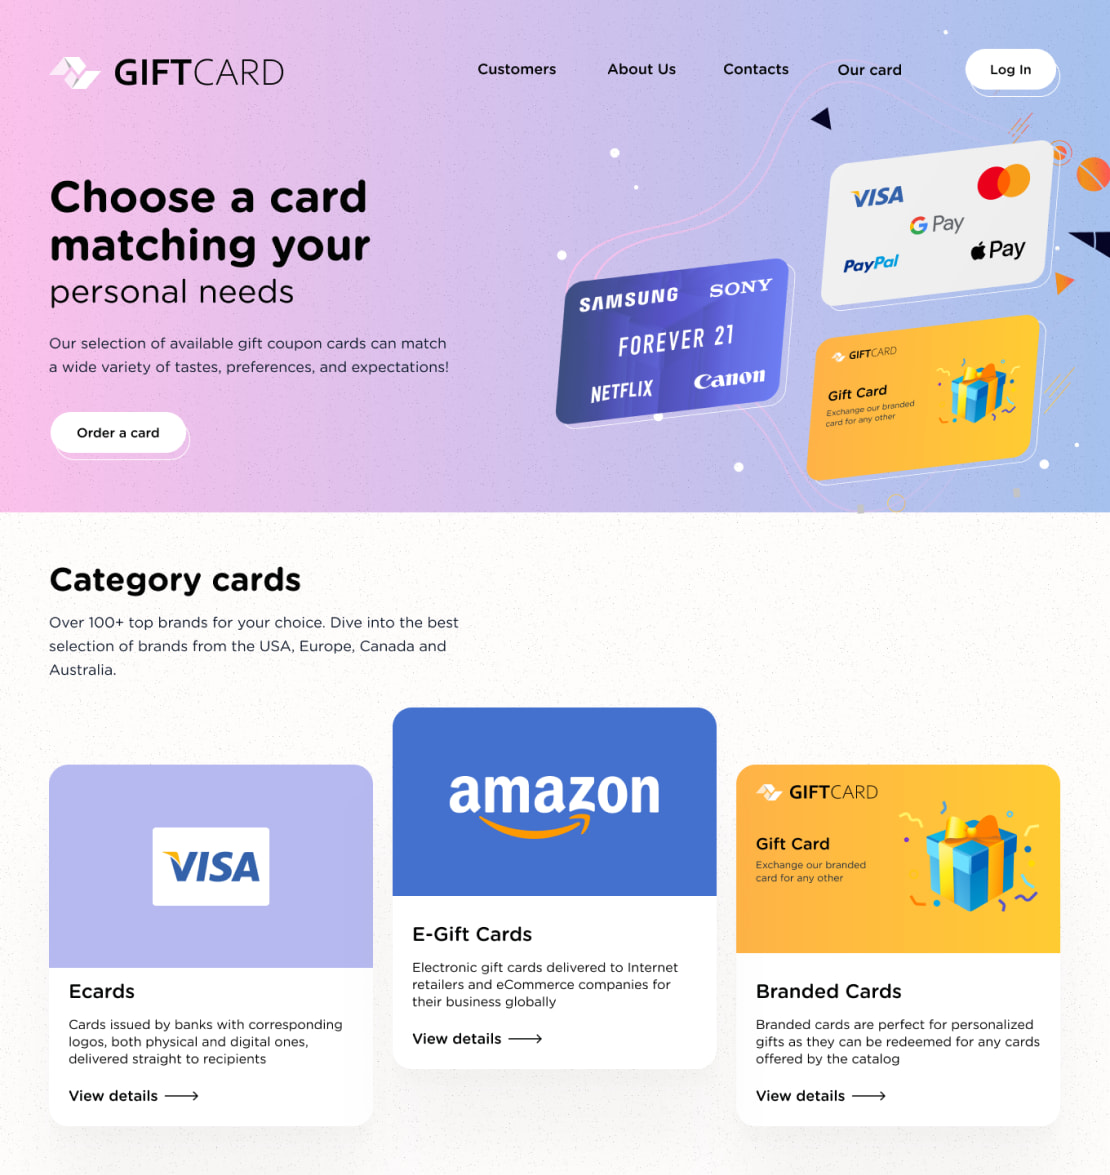 The platform's welcome page and card categories